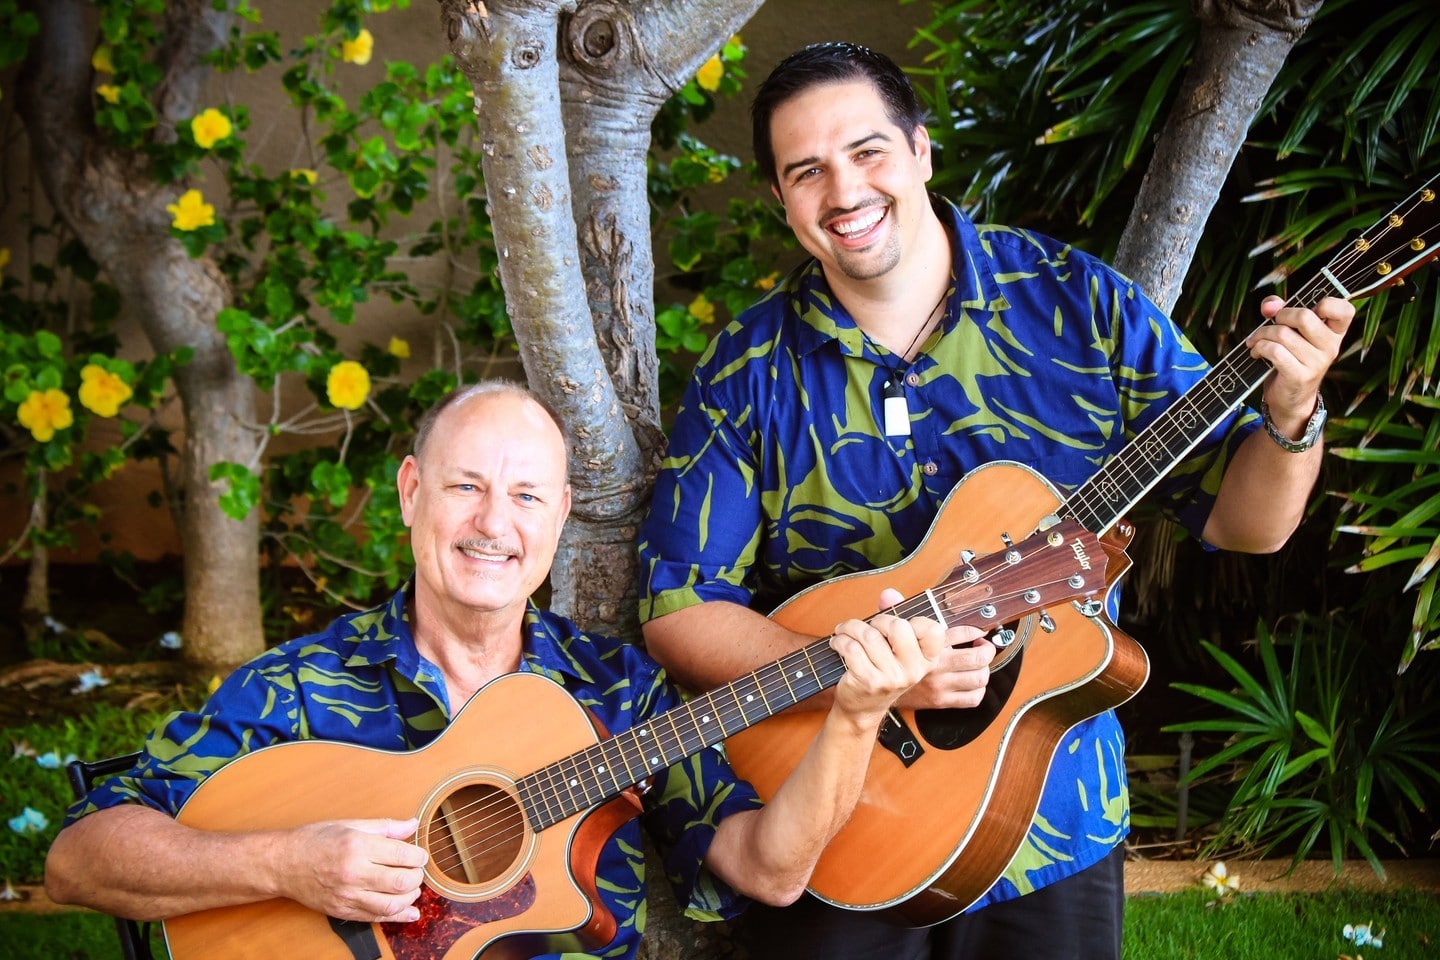 We’re kicking off the summer with the return of Kona Nui Nights on June 8 from 6pm-8pm at Victoria Ward Park featuring live music by Jerry Santos and Kamuela Kimokeo. Bring a blanket, chair and a picnic, or purchase food and drink from one of our neighborhood eateries, and enjoy an evening alfresco. Learn more in our link in bio!